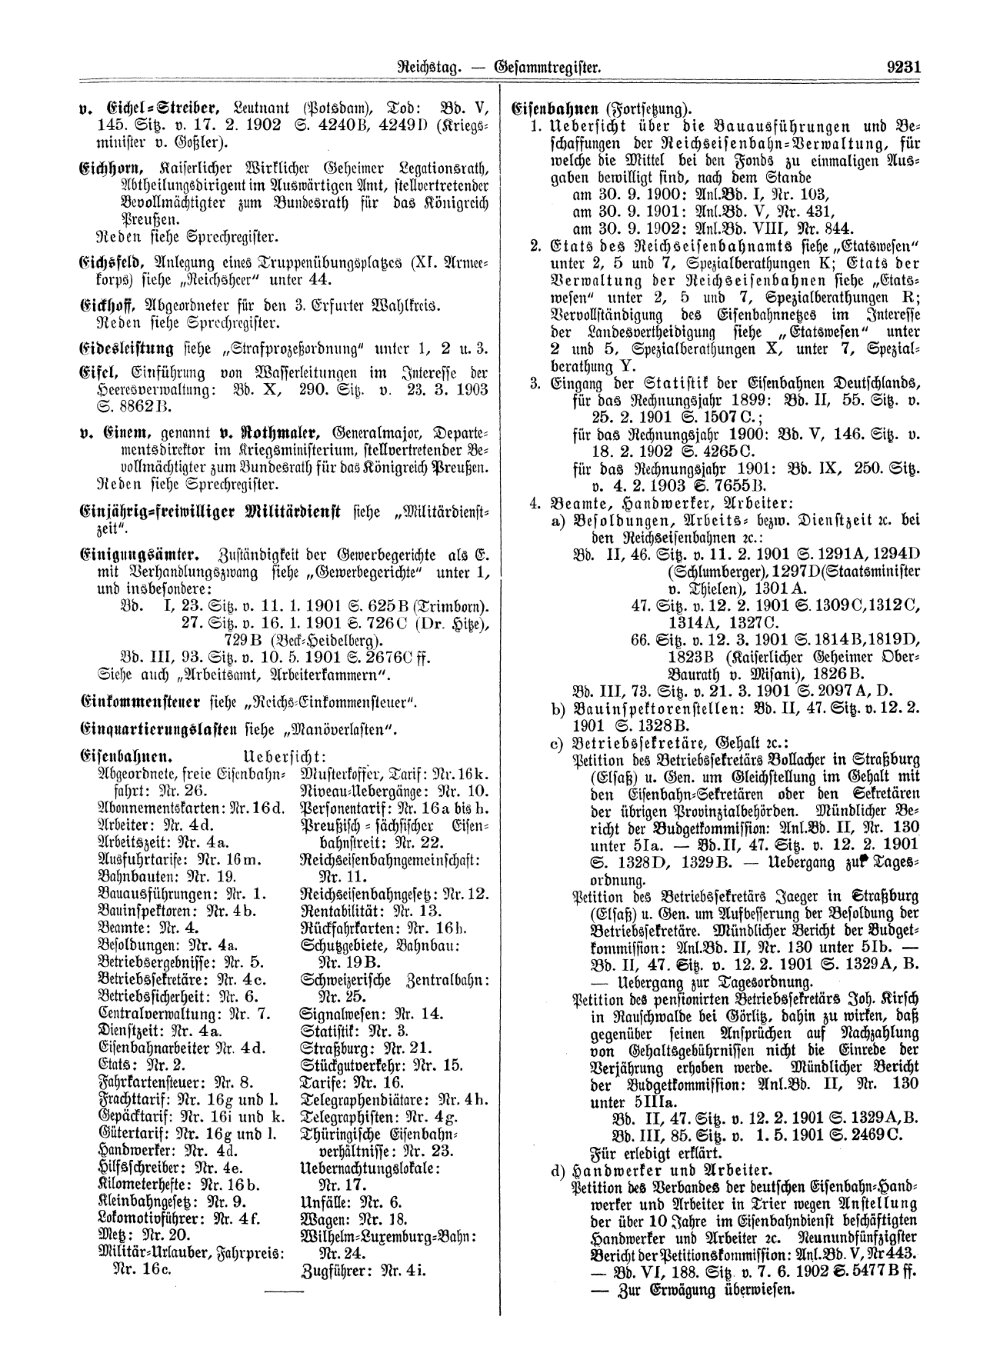 Scan of page 9231